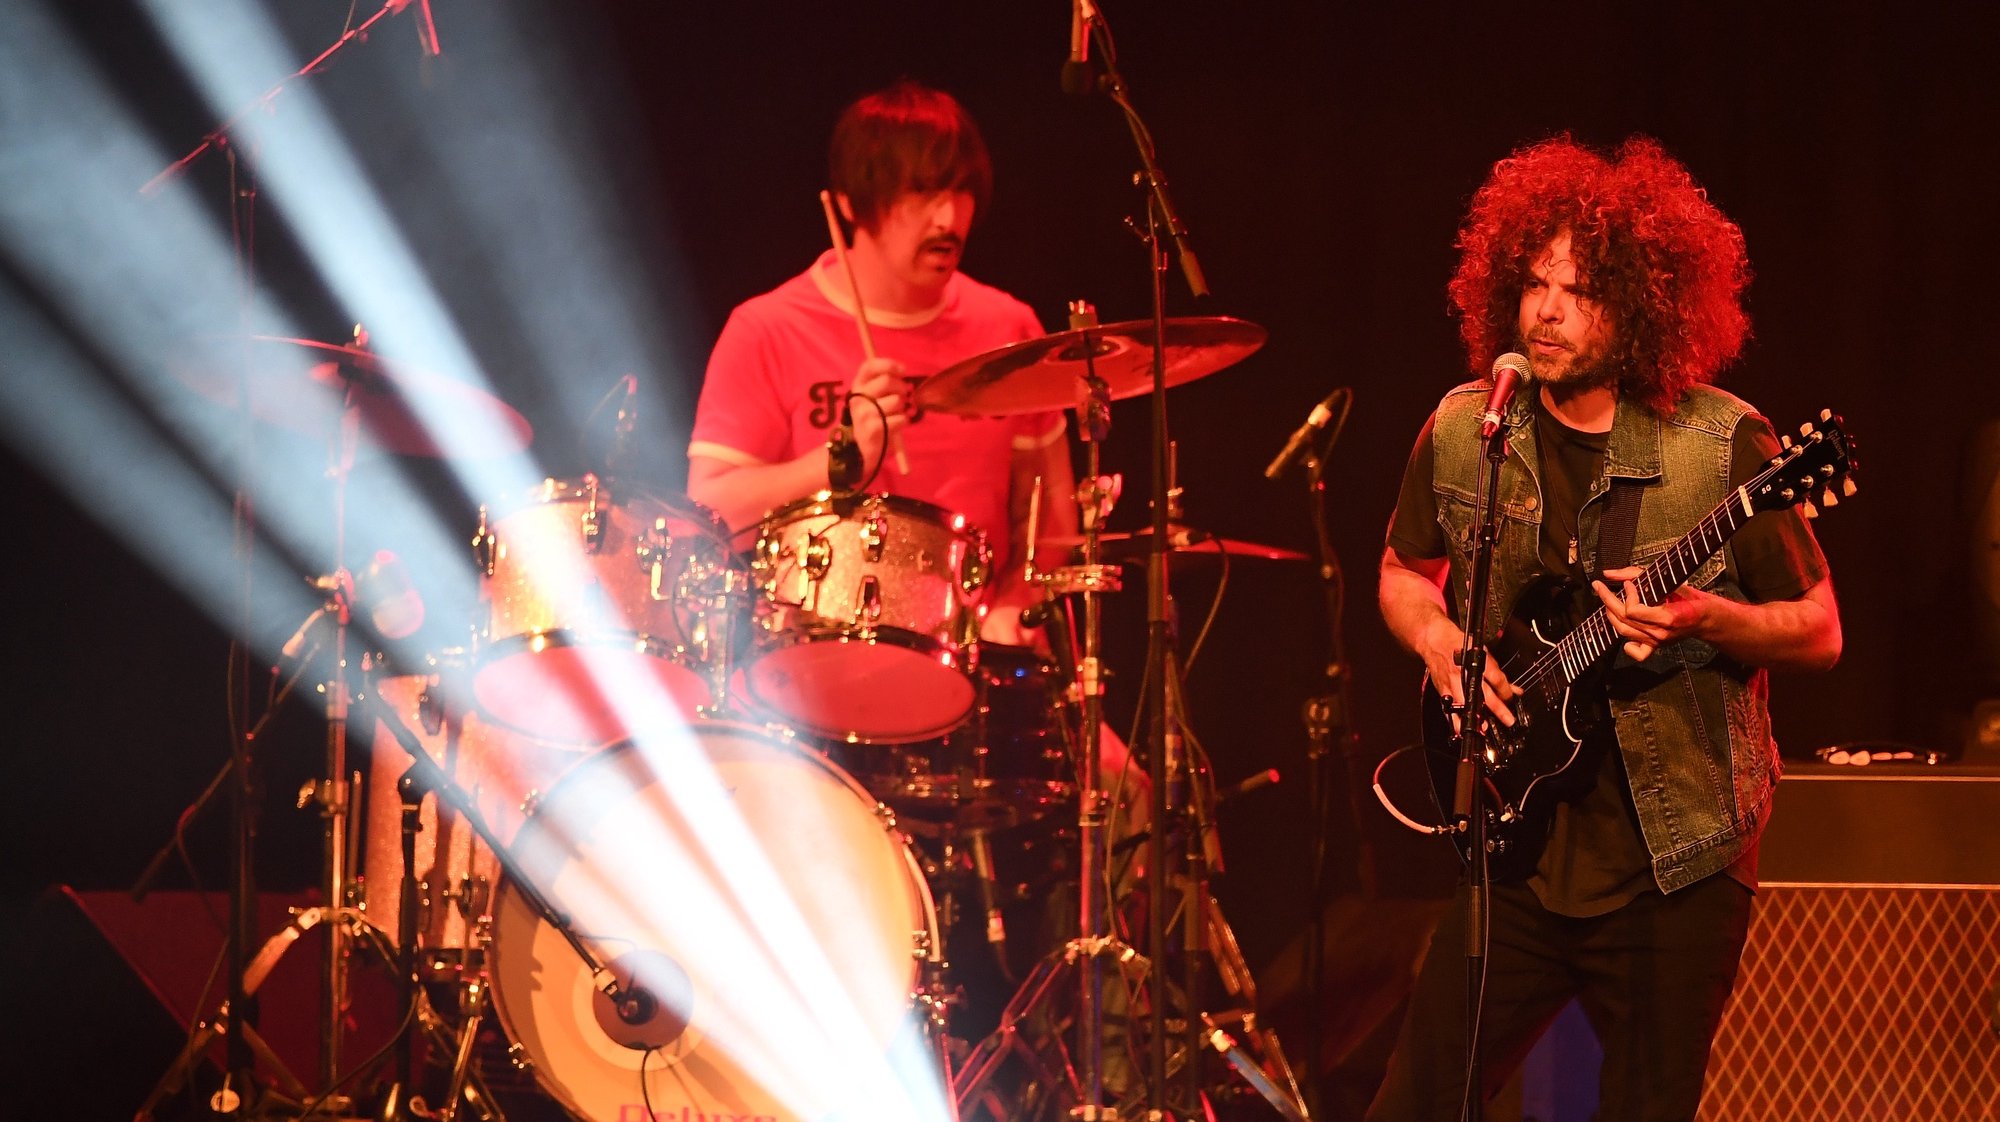 epa07875895 Hamish Rosser (L) and Andrew James Stockdale (R) of Australian hard rock band Wolfmother perform on stage during the AFL North Melbourne Grand Final Breakfast at the Melbourne Convention and Exhibition Centre in Melbourne, Victoria, Australia, 28 September 2019. The Richmond Tigers play the GWS Giants in the 2019 AFL Grand Final.  EPA/JULIAN SMITH  AUSTRALIA AND NEW ZEALAND OUT